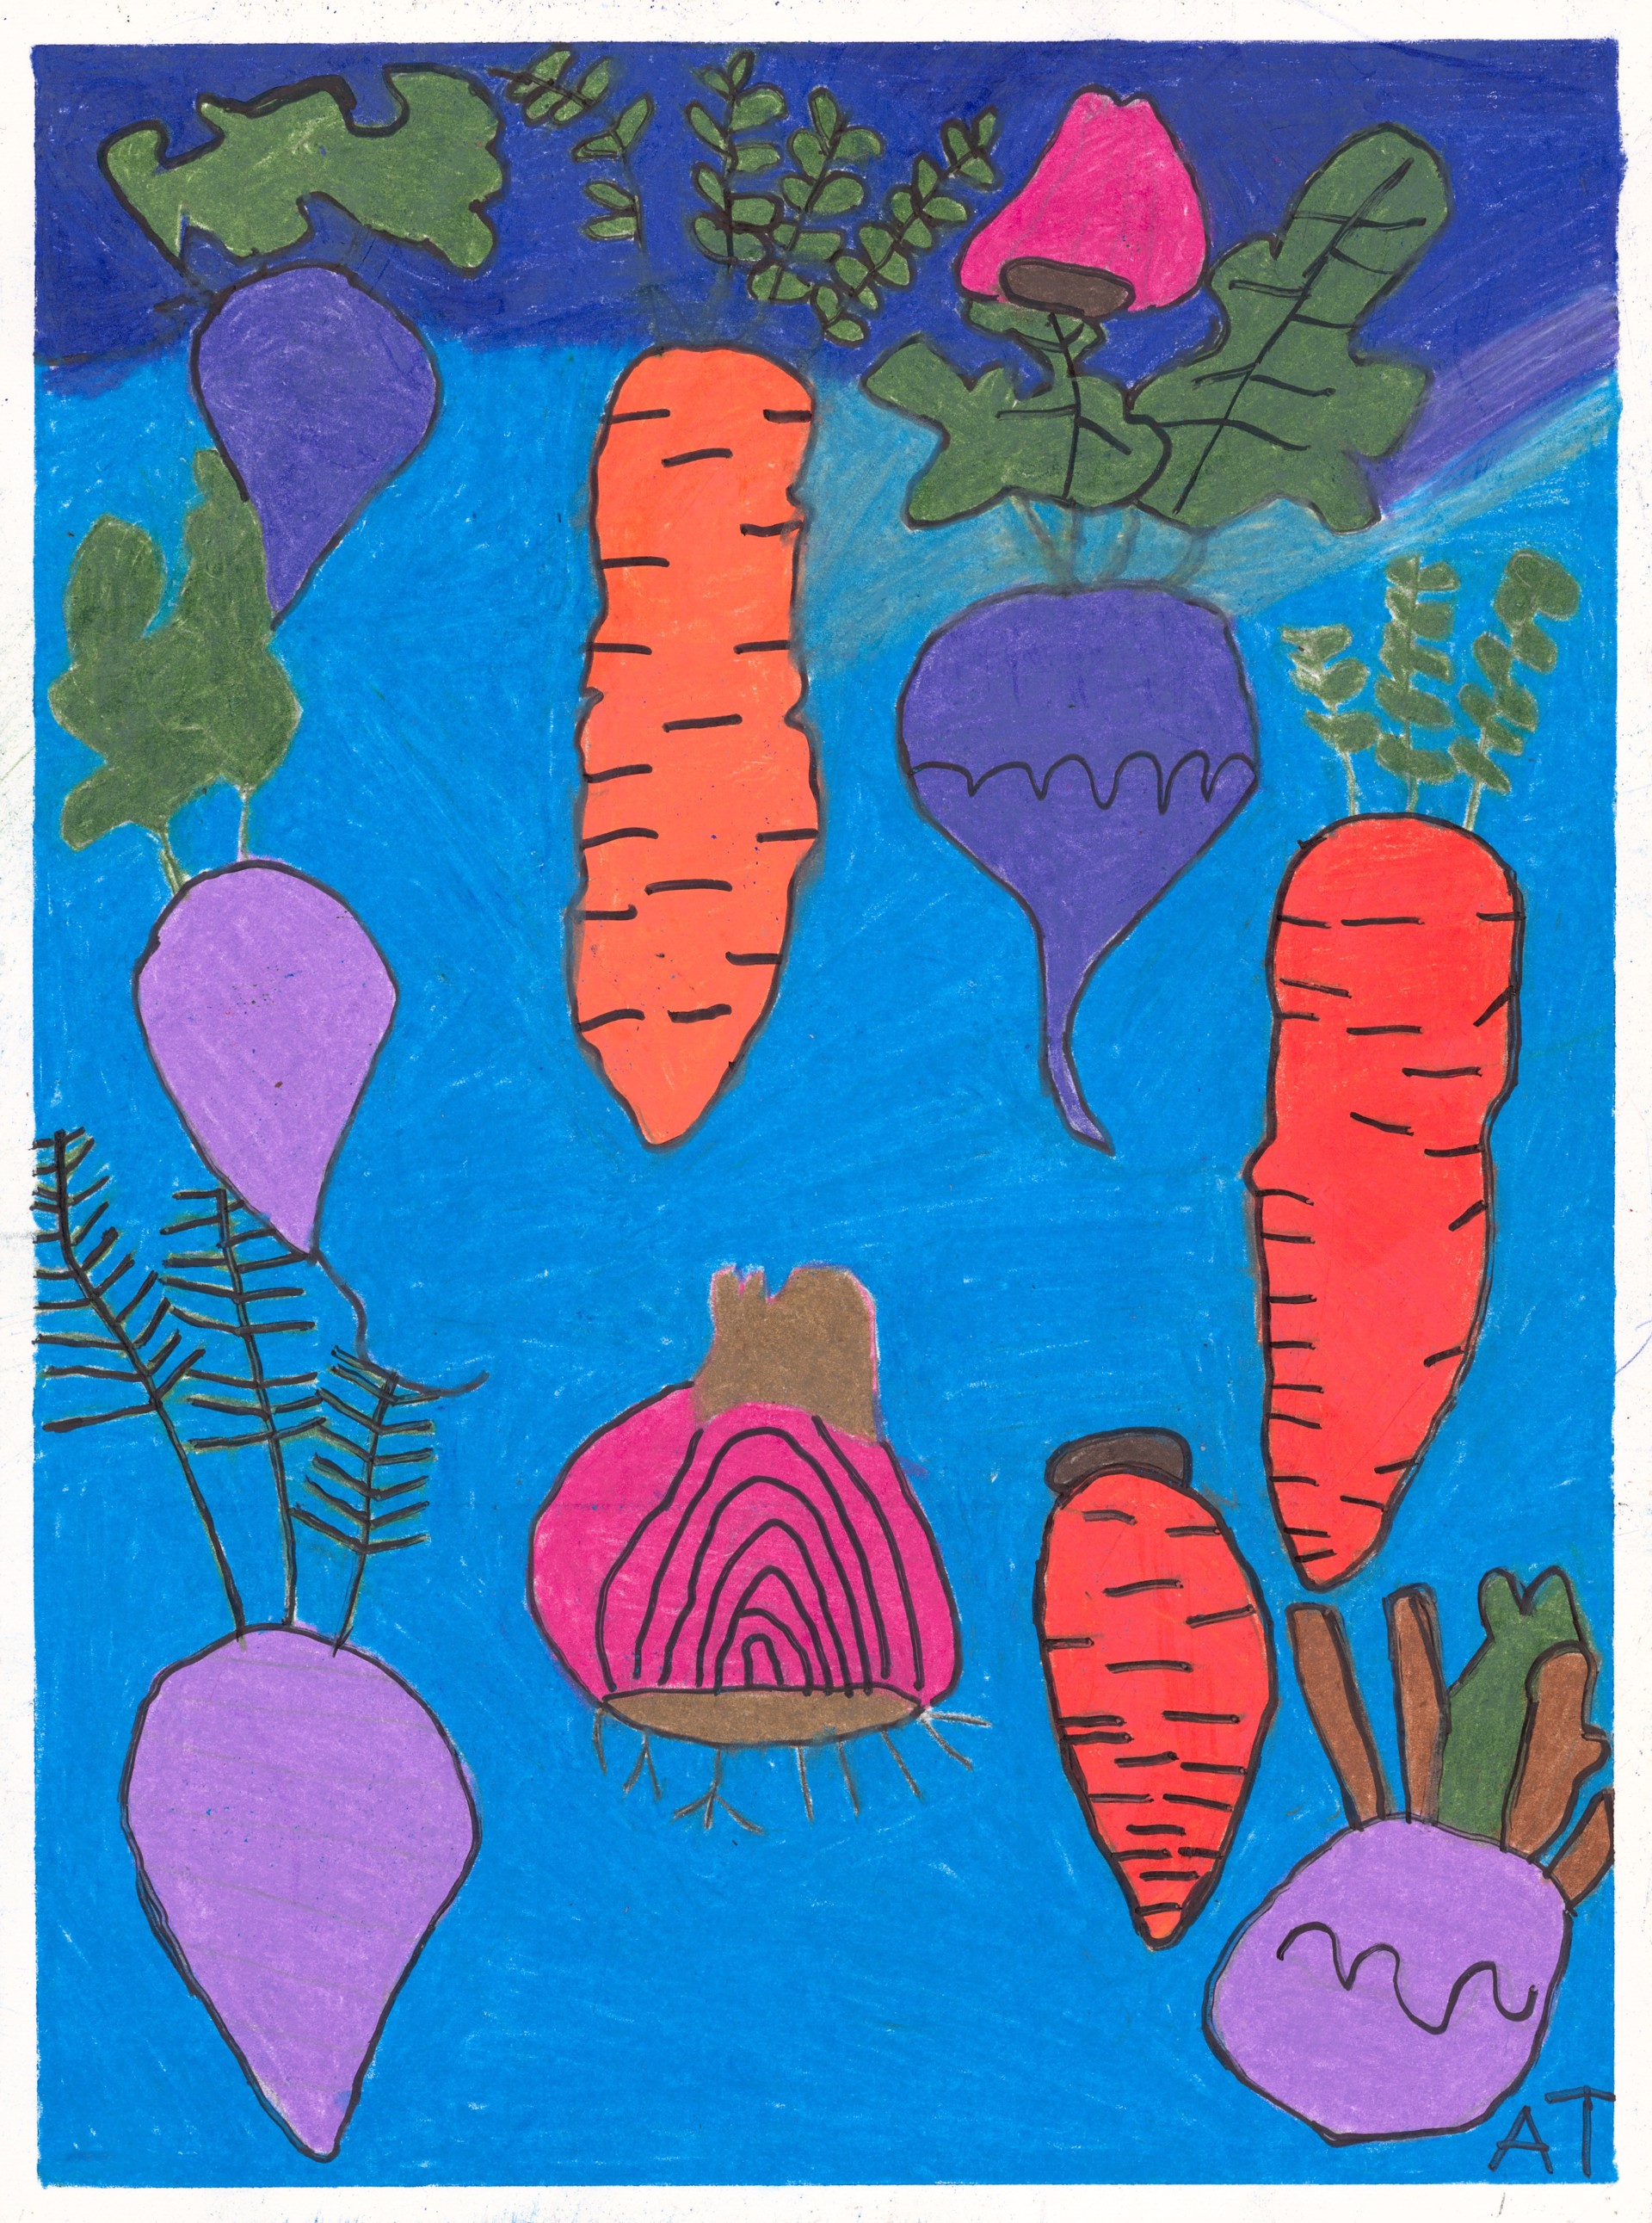 Beets, Carrots, and Onions by A.T.